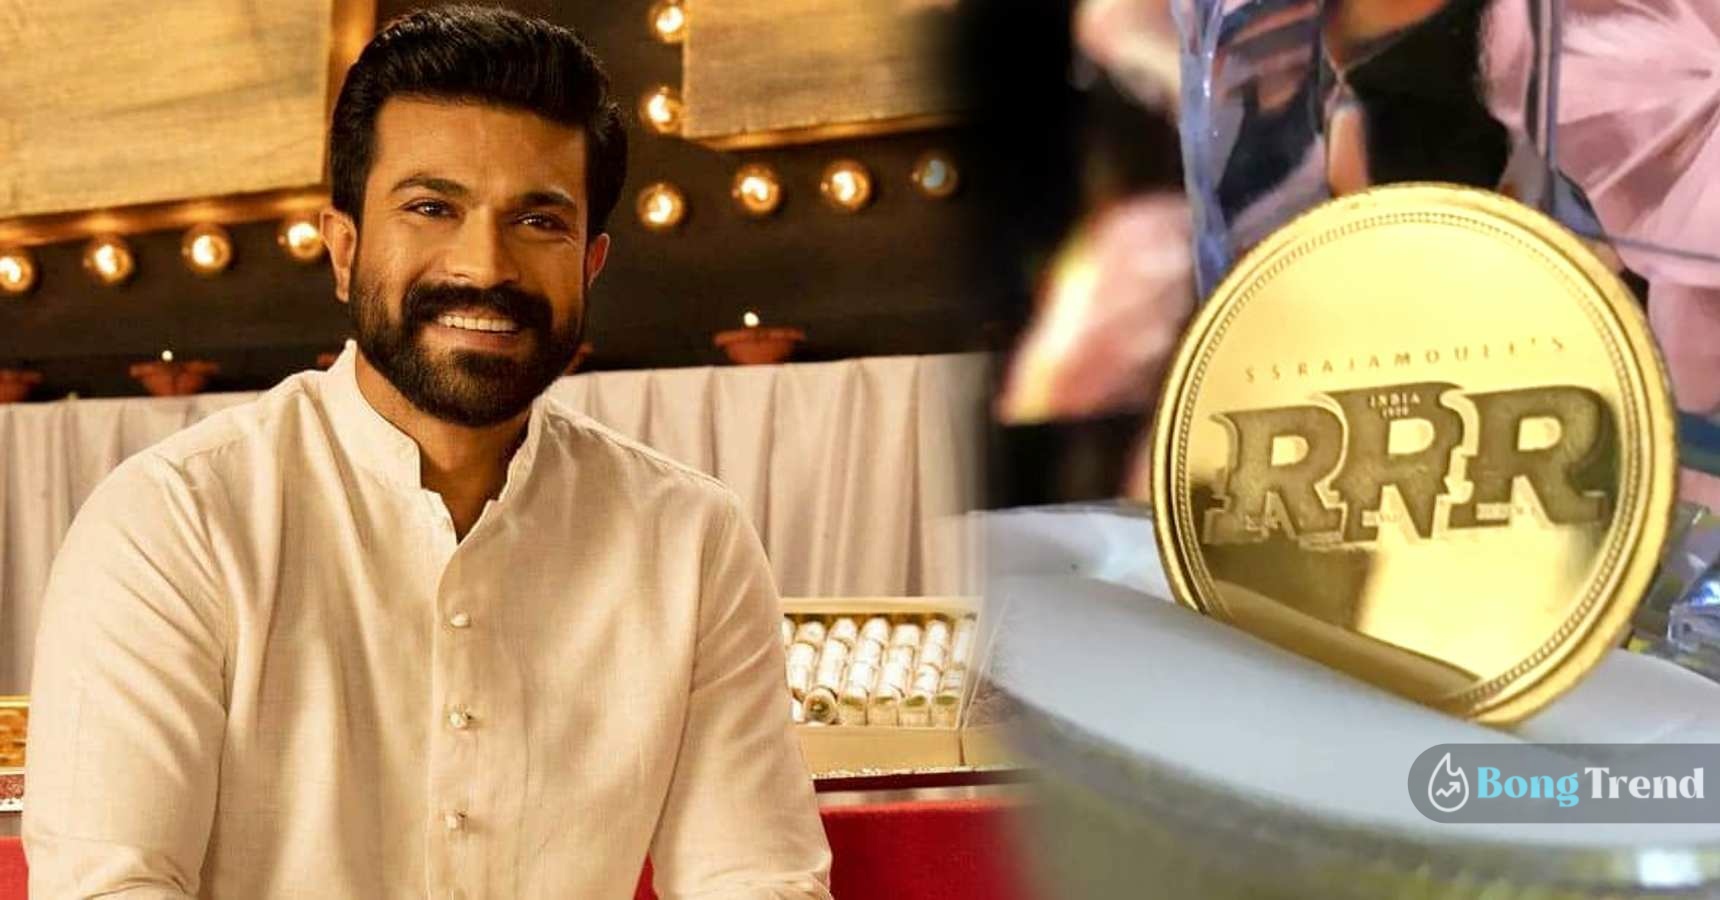 Ramcharan gave RRR movie technicians gold coins worth more than 18 lacs